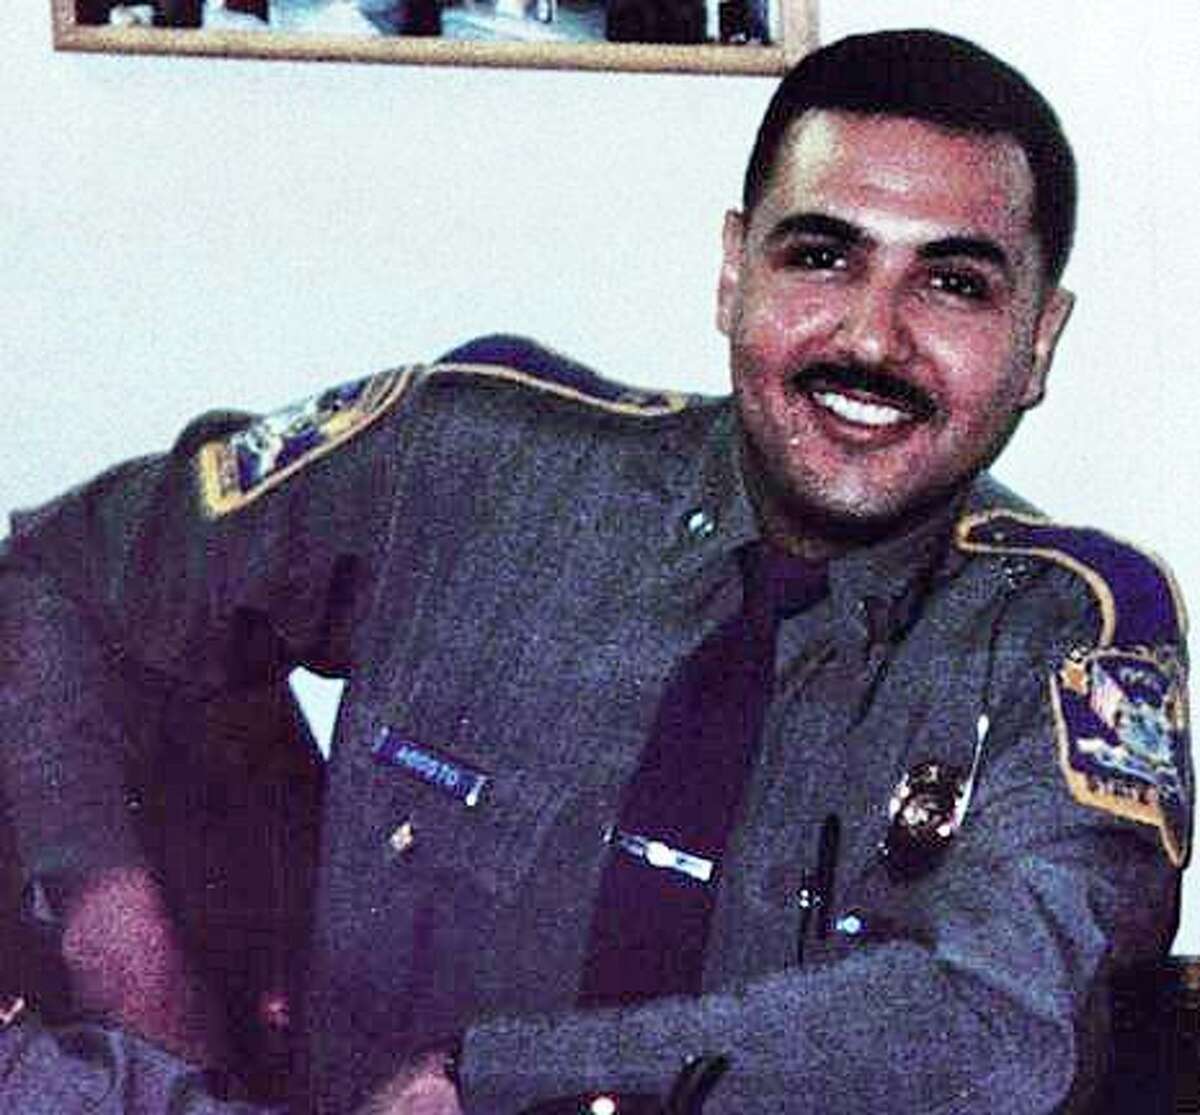 Thirty years ago today, a Connecticut state trooper was struck and killed on I-95 in Greenwich. Trooper Jorge Agosto, who was 27 years old, was working on one of the busiest traffic days of the year - the day before Thanksgiving - Wednesday, Nov. 22, 1989.